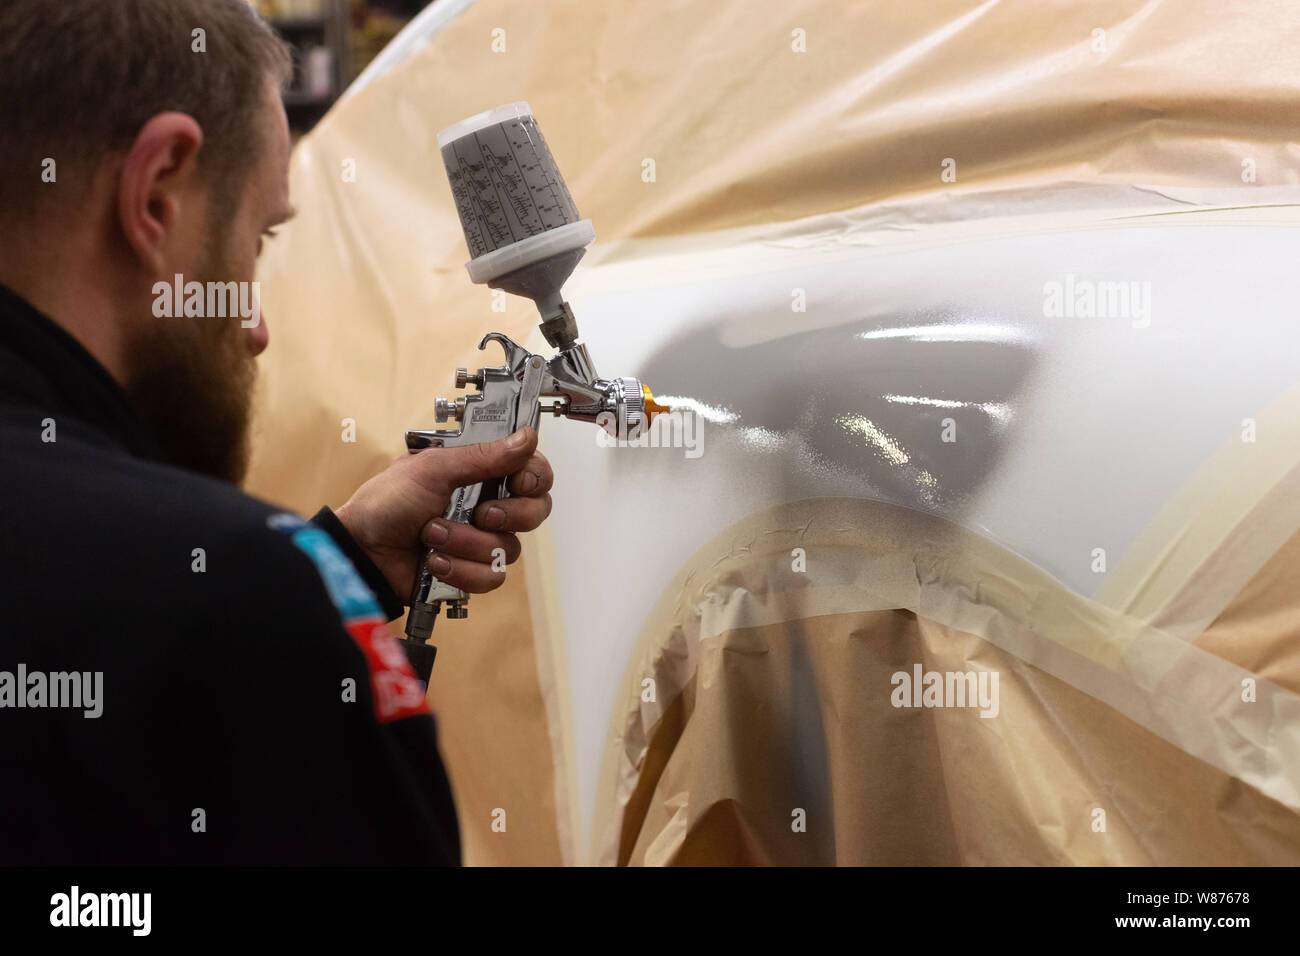 “Bonhomme Automobile” car body shop in Montelier (southeastern France). Worker spraying paint on a car body. Stock Photo